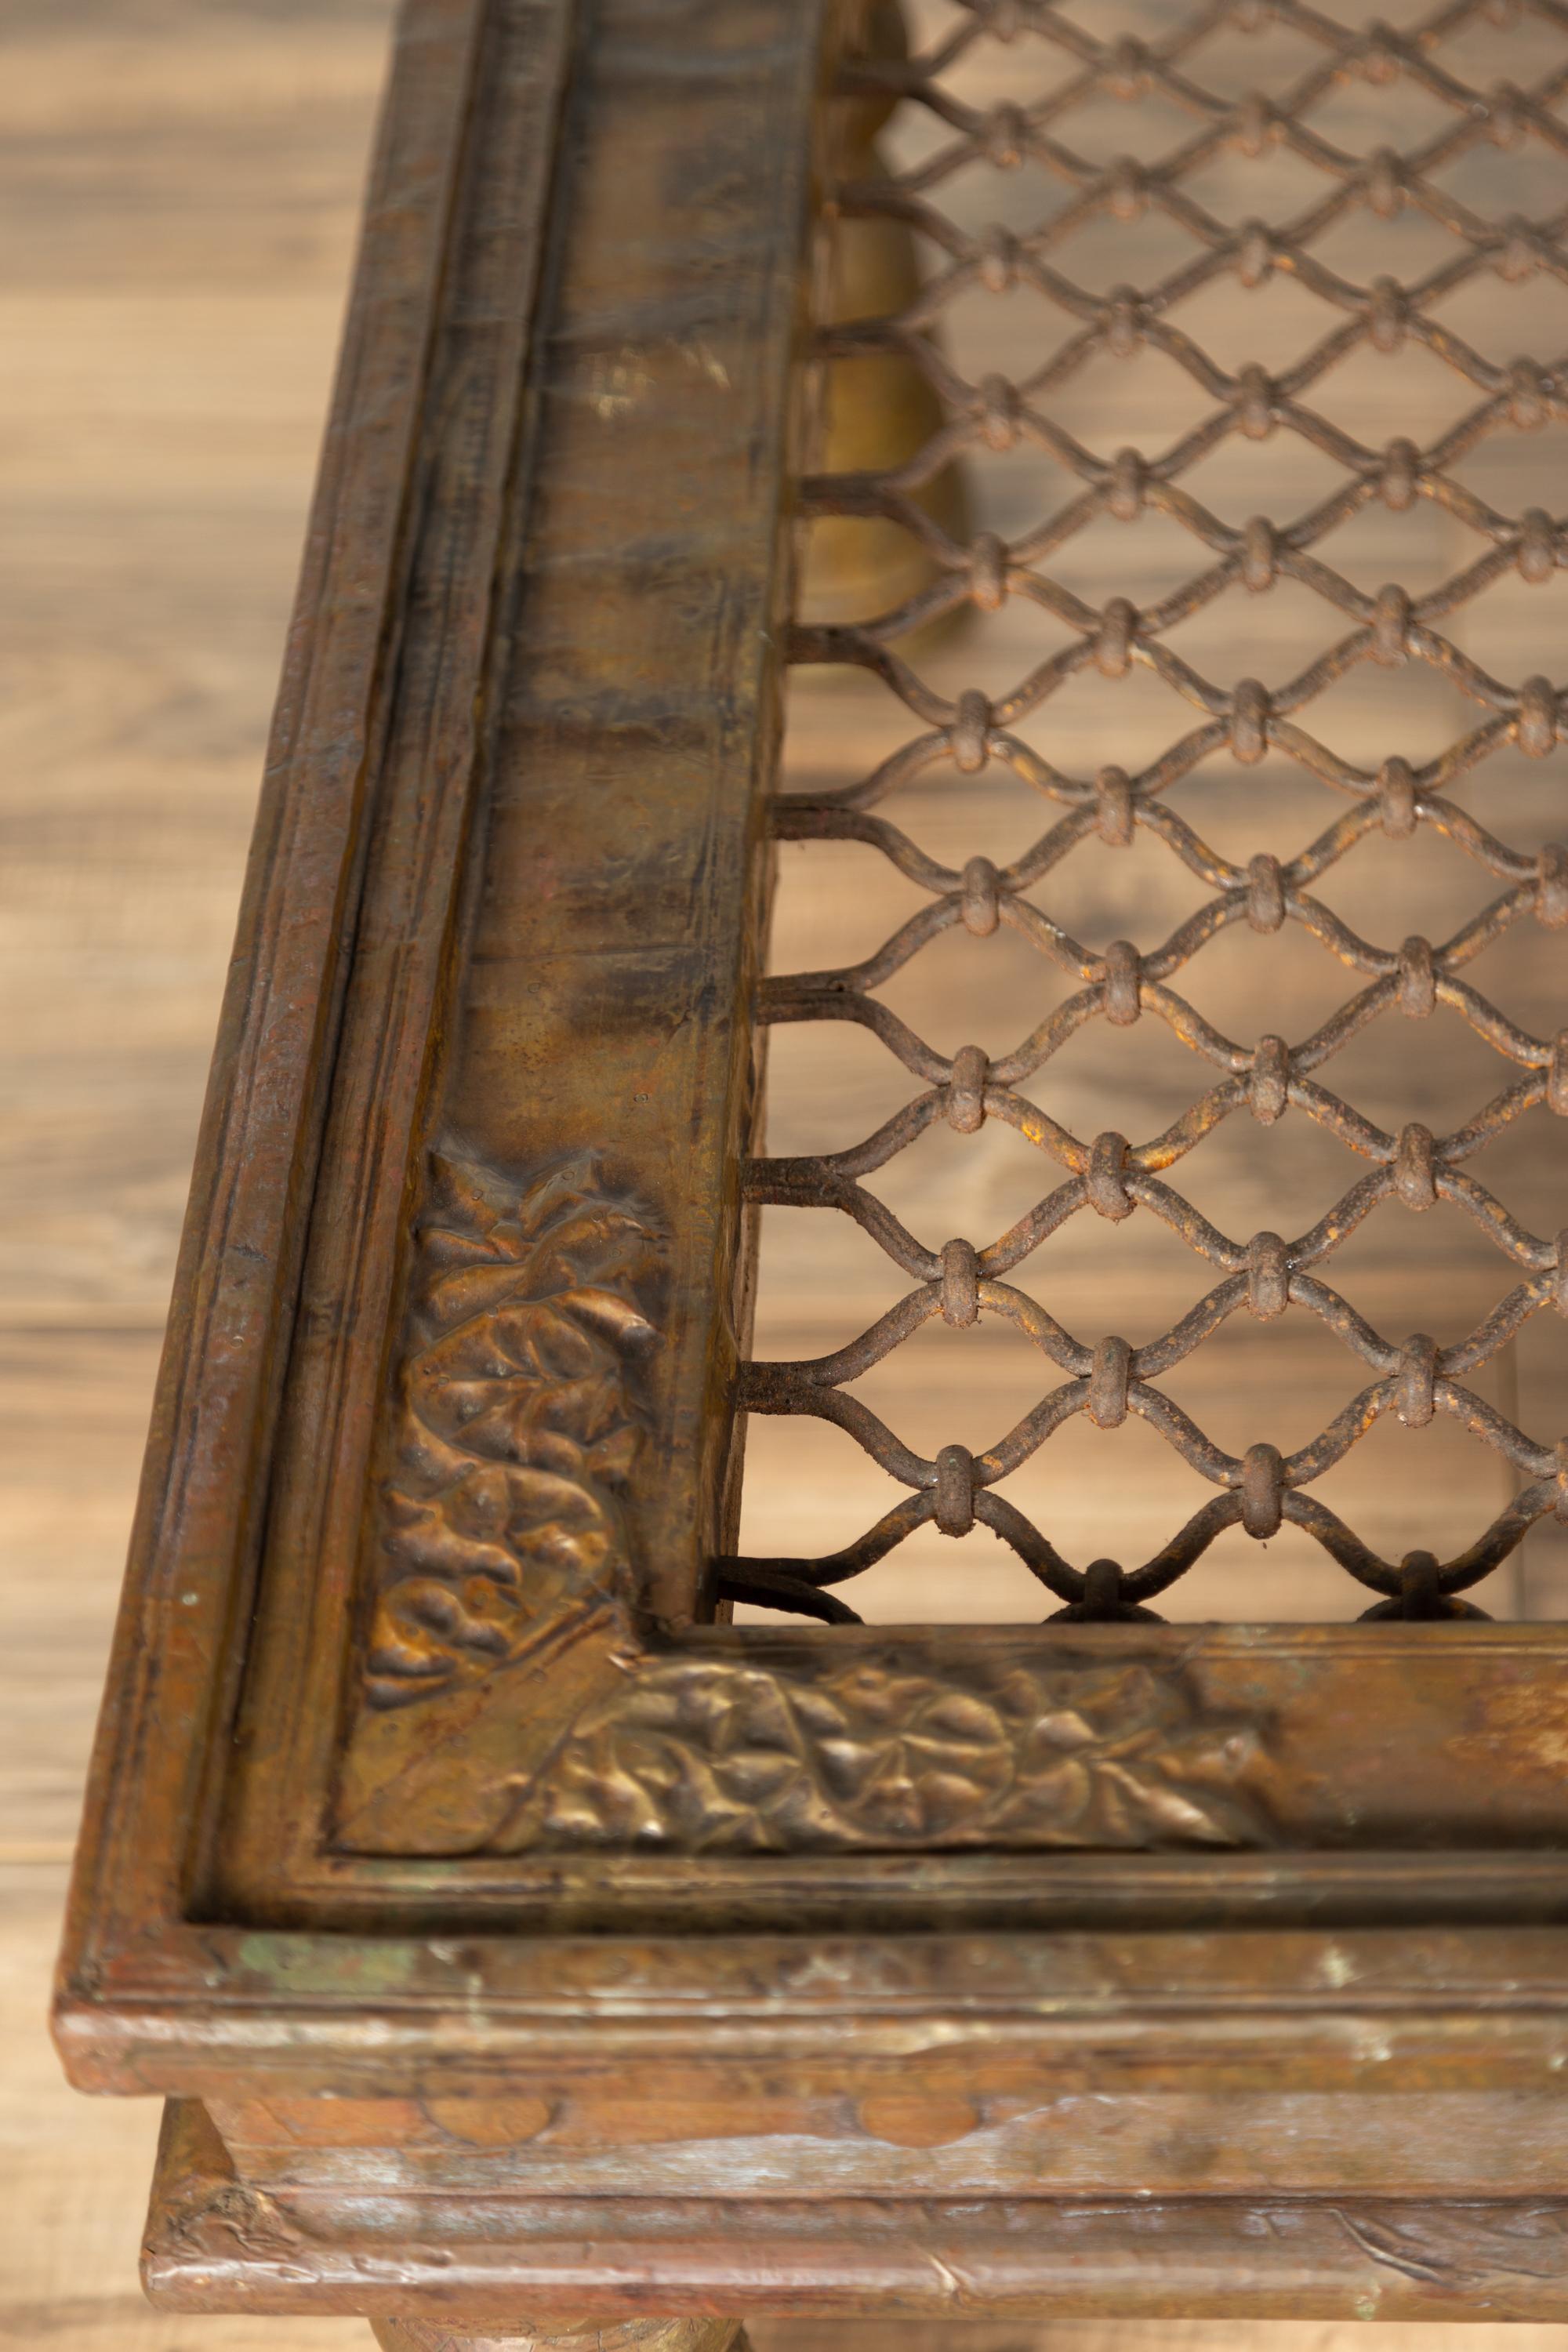 Rustic Antique Indian Window Grate Made into a Coffee Table with Copper Sheathing